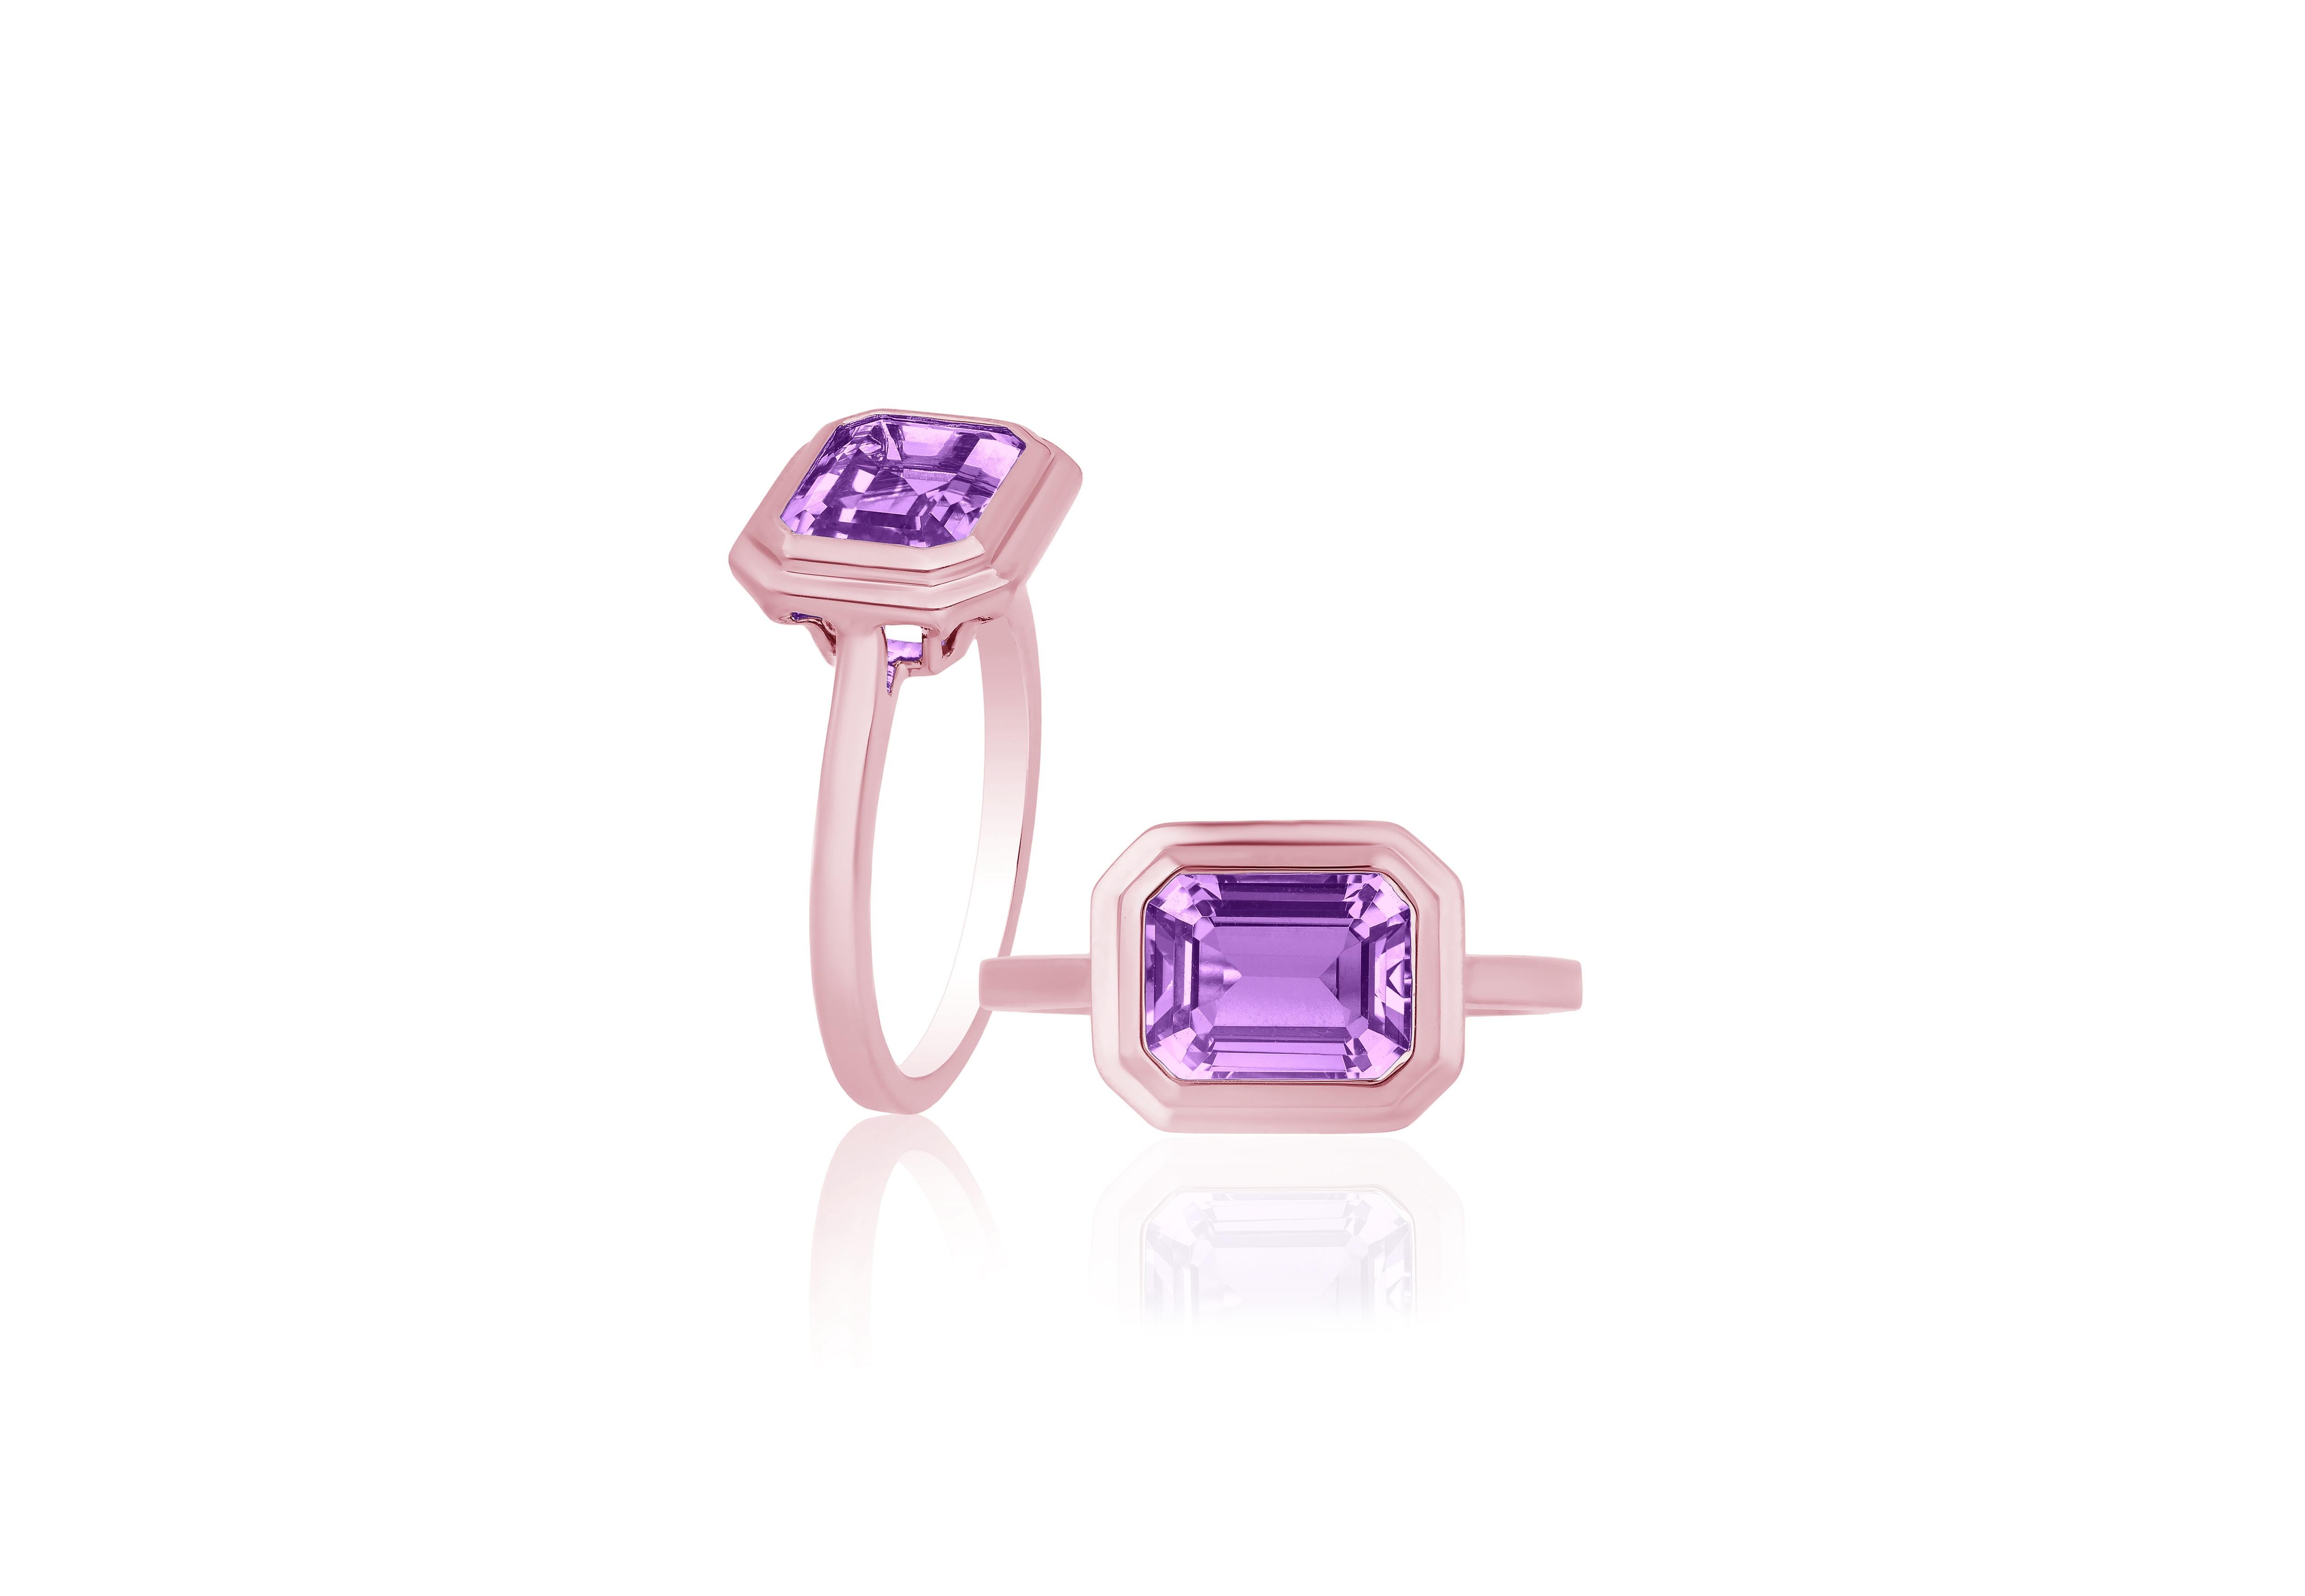 This Lavender Amethyst Emerald Cut Bezel Set Ring in 18K Rose Gold is a sleek piece from the 'Manhattan' Collection. It features a stunning emerald-cut lavender amethyst stone set in a 18K rose gold bezel. This ring embodies modern elegance,